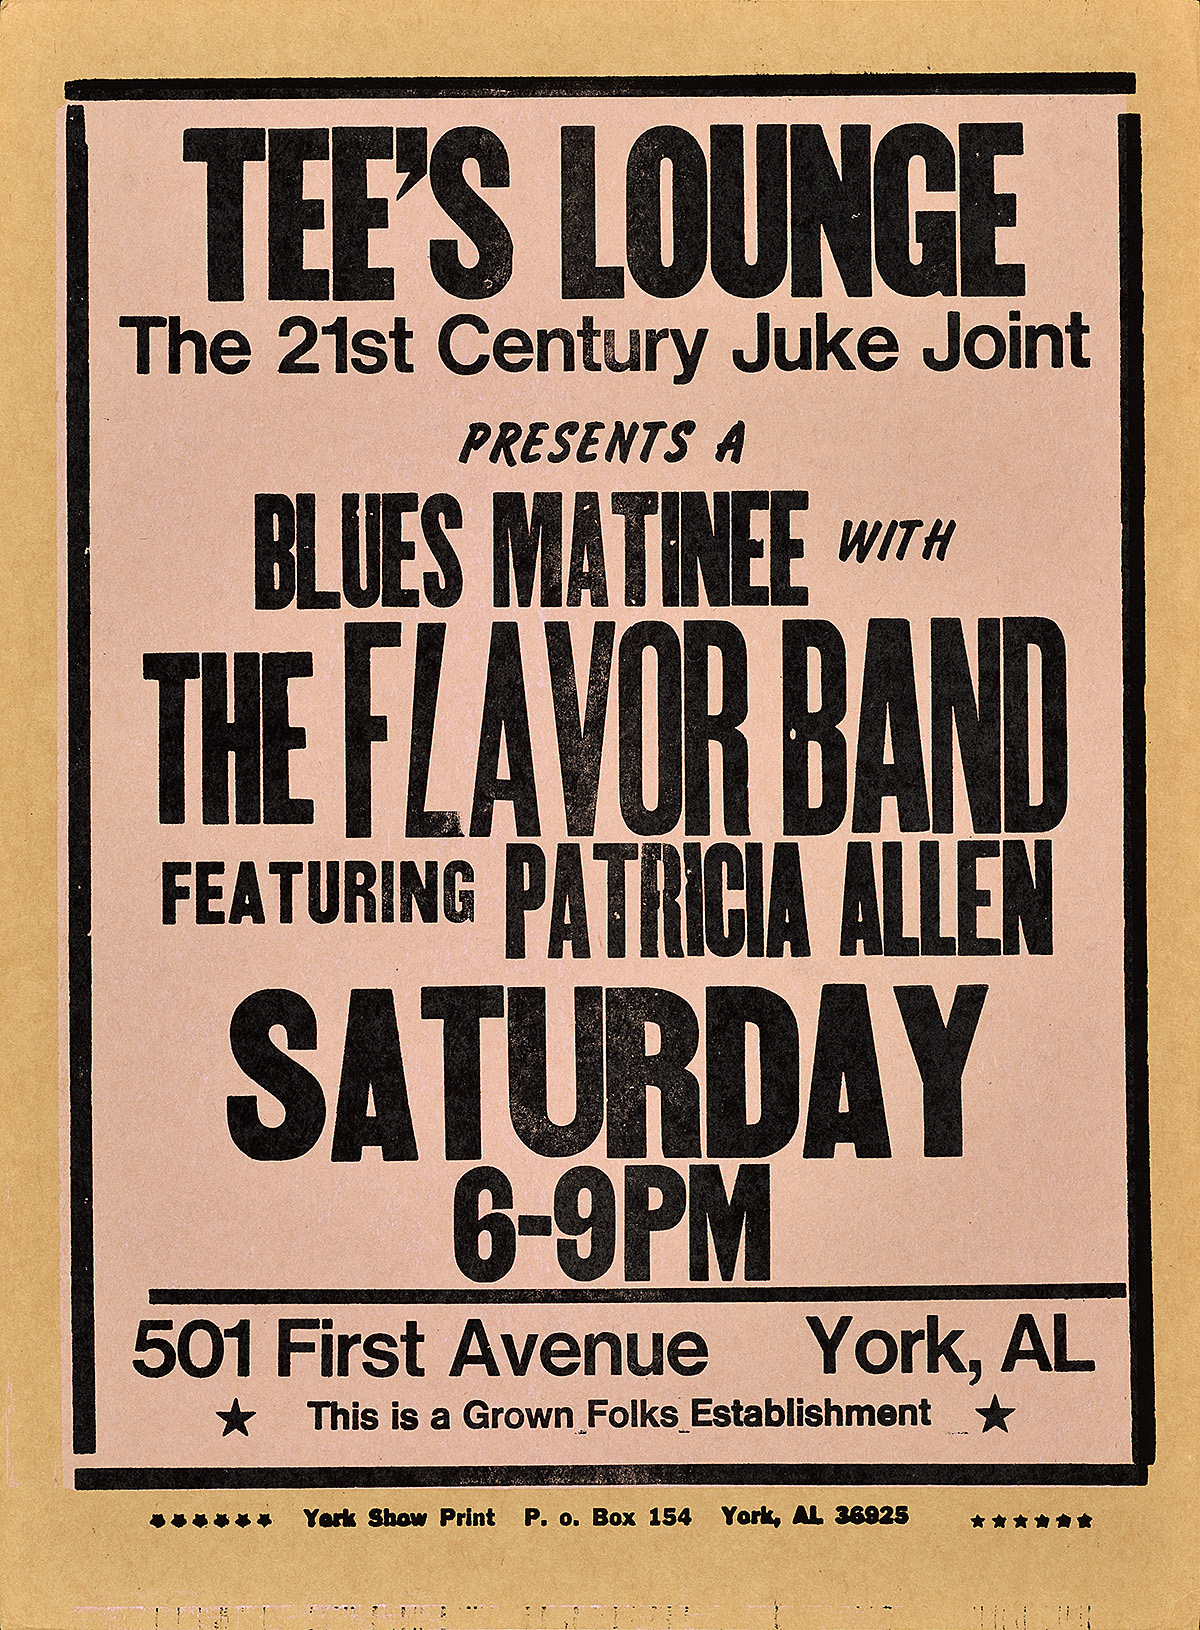 Letterpress poster advertising a band playing at Tee’s Lounge.